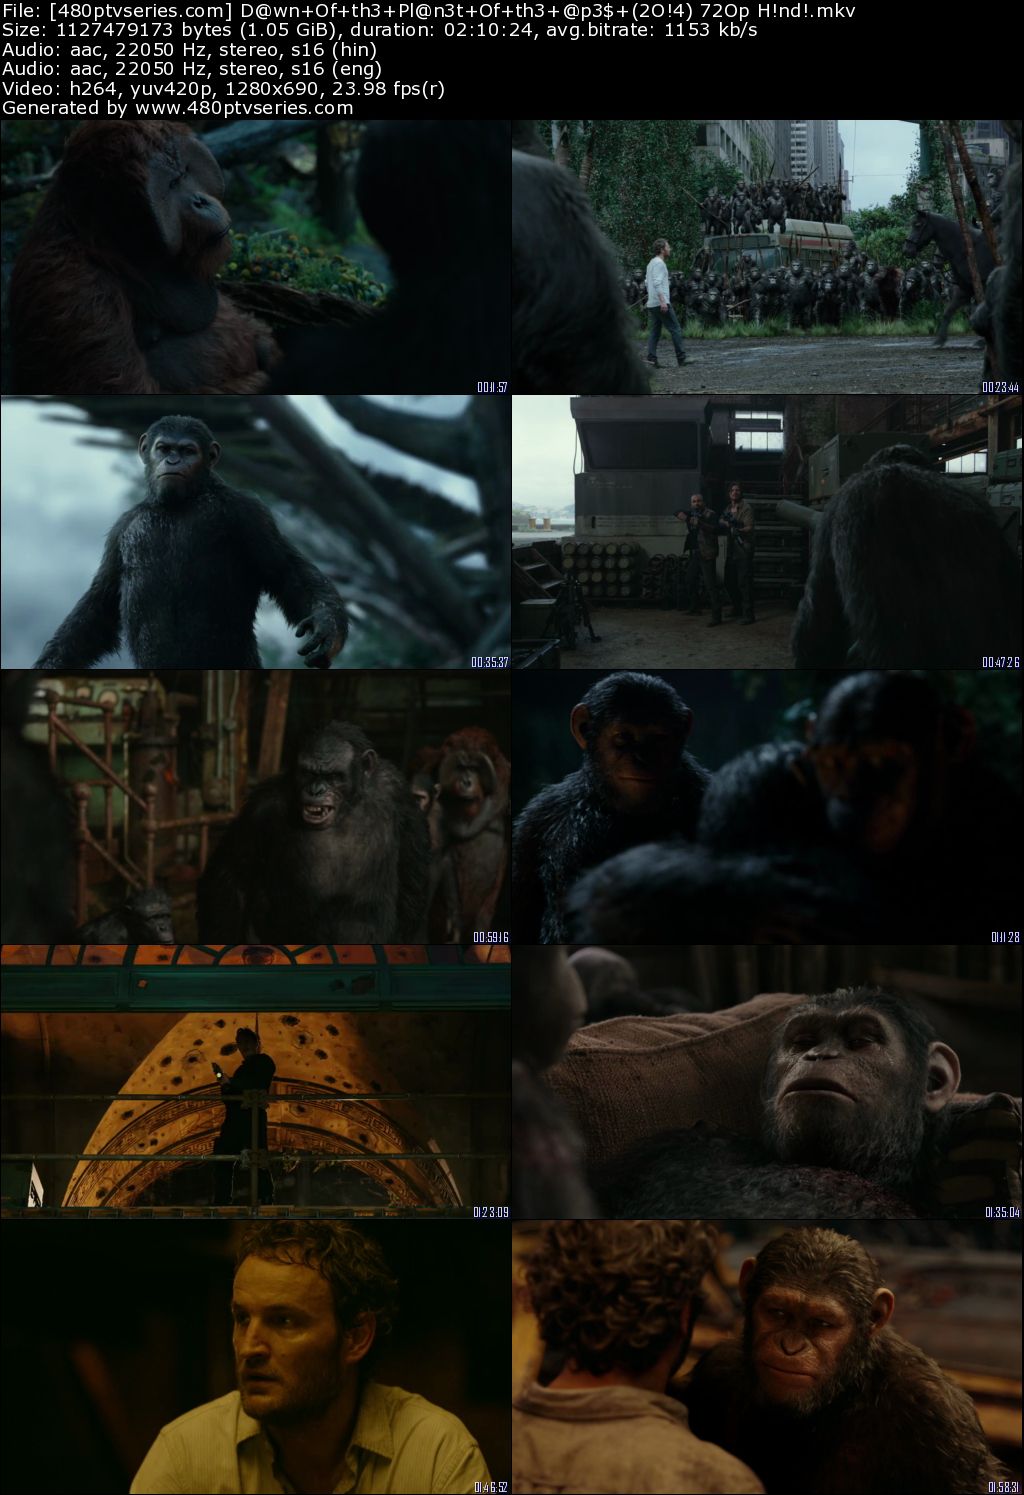 Download Dawn of the Planet of the Apes (2014) 1GB Full Hindi Dual Audio Movie Download 720p Bluray Free Watch Online Free Full Movie Download Worldfree4u 9xmovies